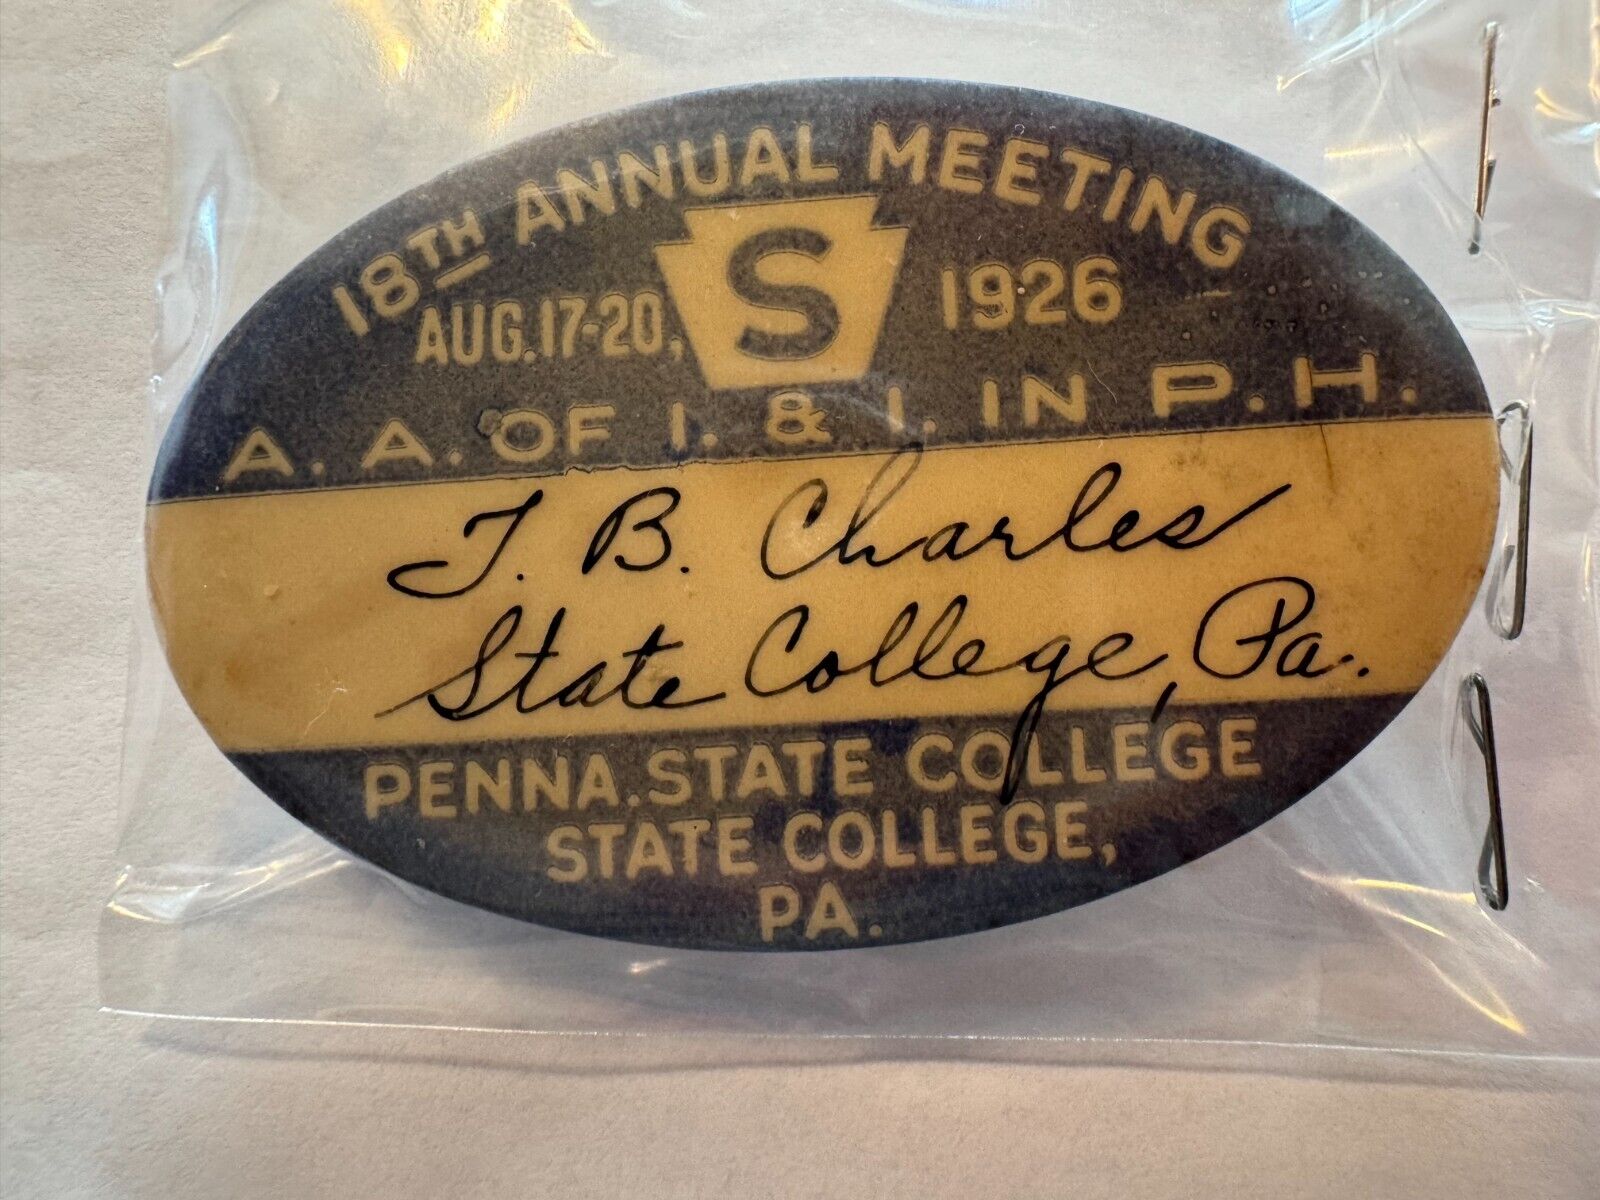 VINTAGE AND RARE 1926 PENNSYLVANIA STATE COLLEGE A.A. OF I & I. IN P.H. BUTTON